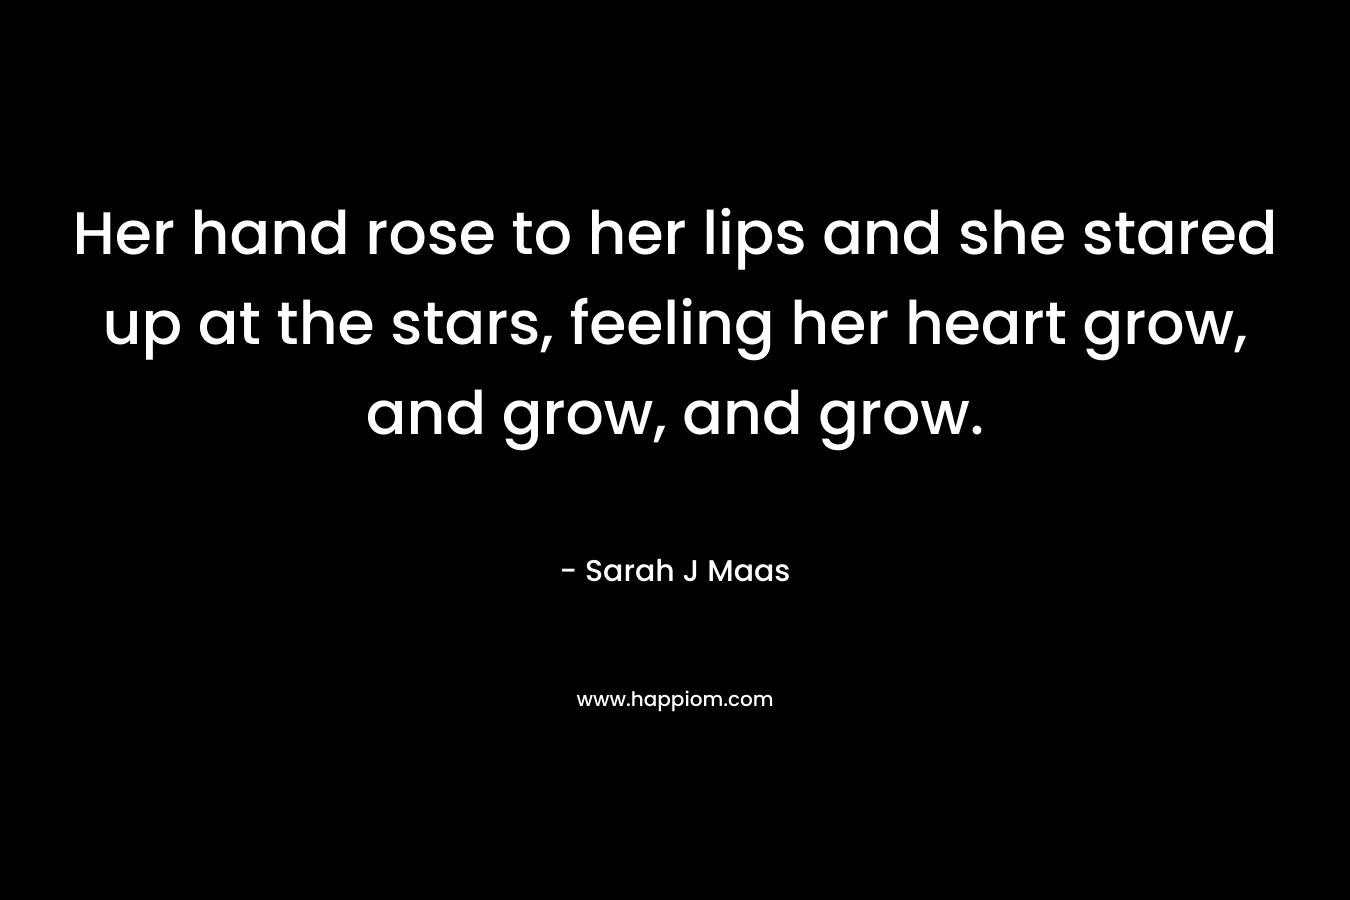 Her hand rose to her lips and she stared up at the stars, feeling her heart grow, and grow, and grow.